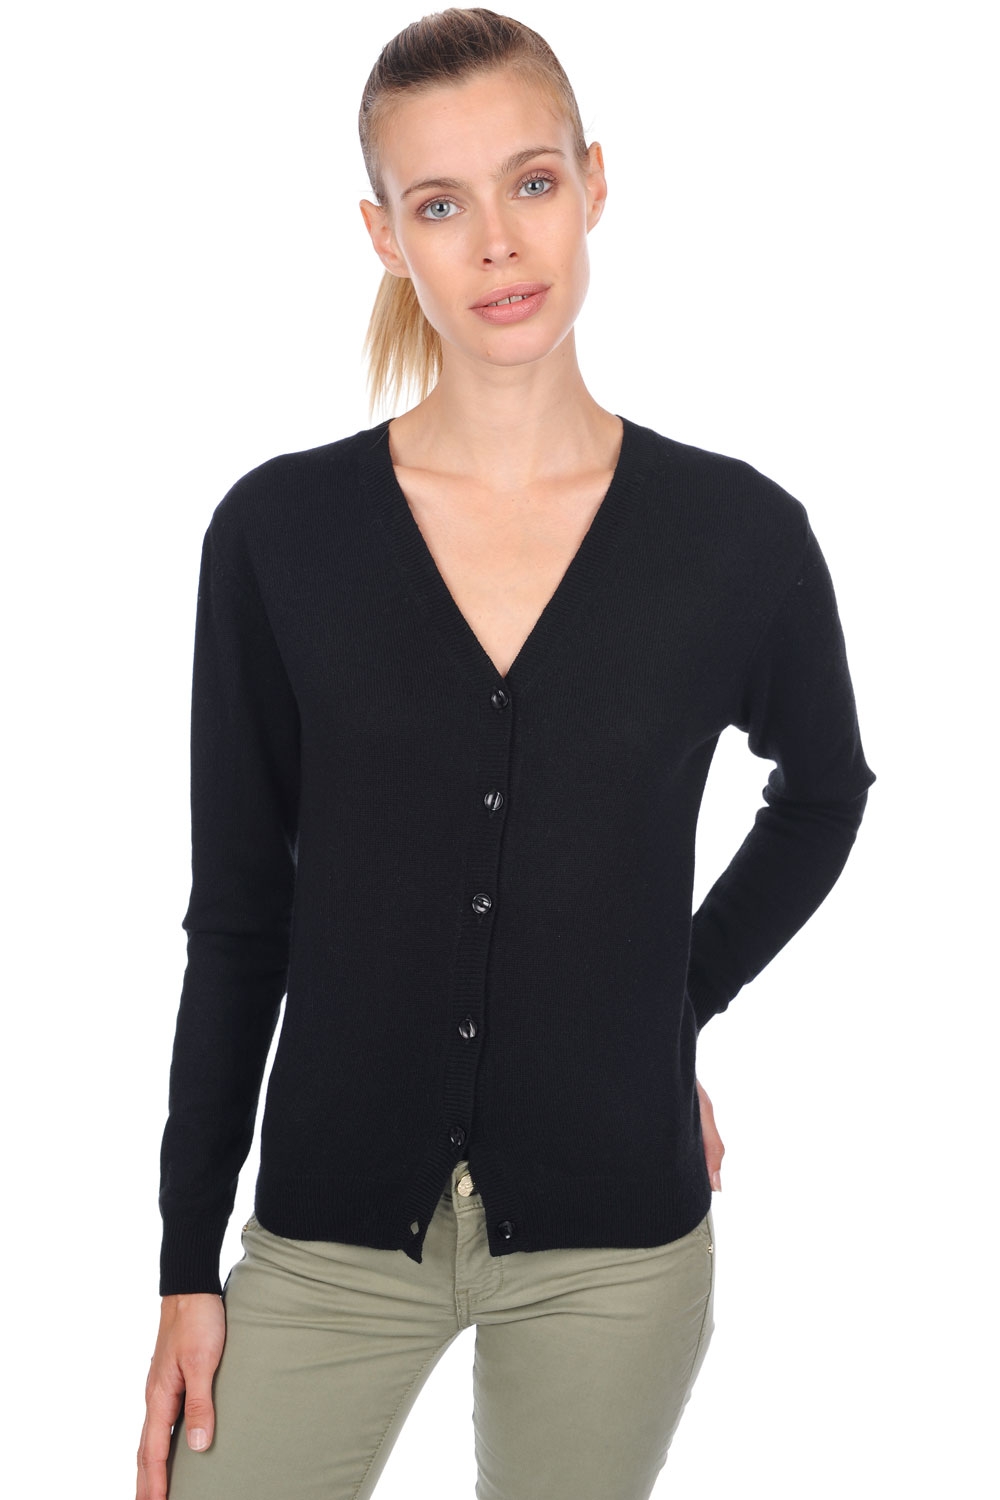 Cashmere ladies basic sweaters at low prices taline first black l